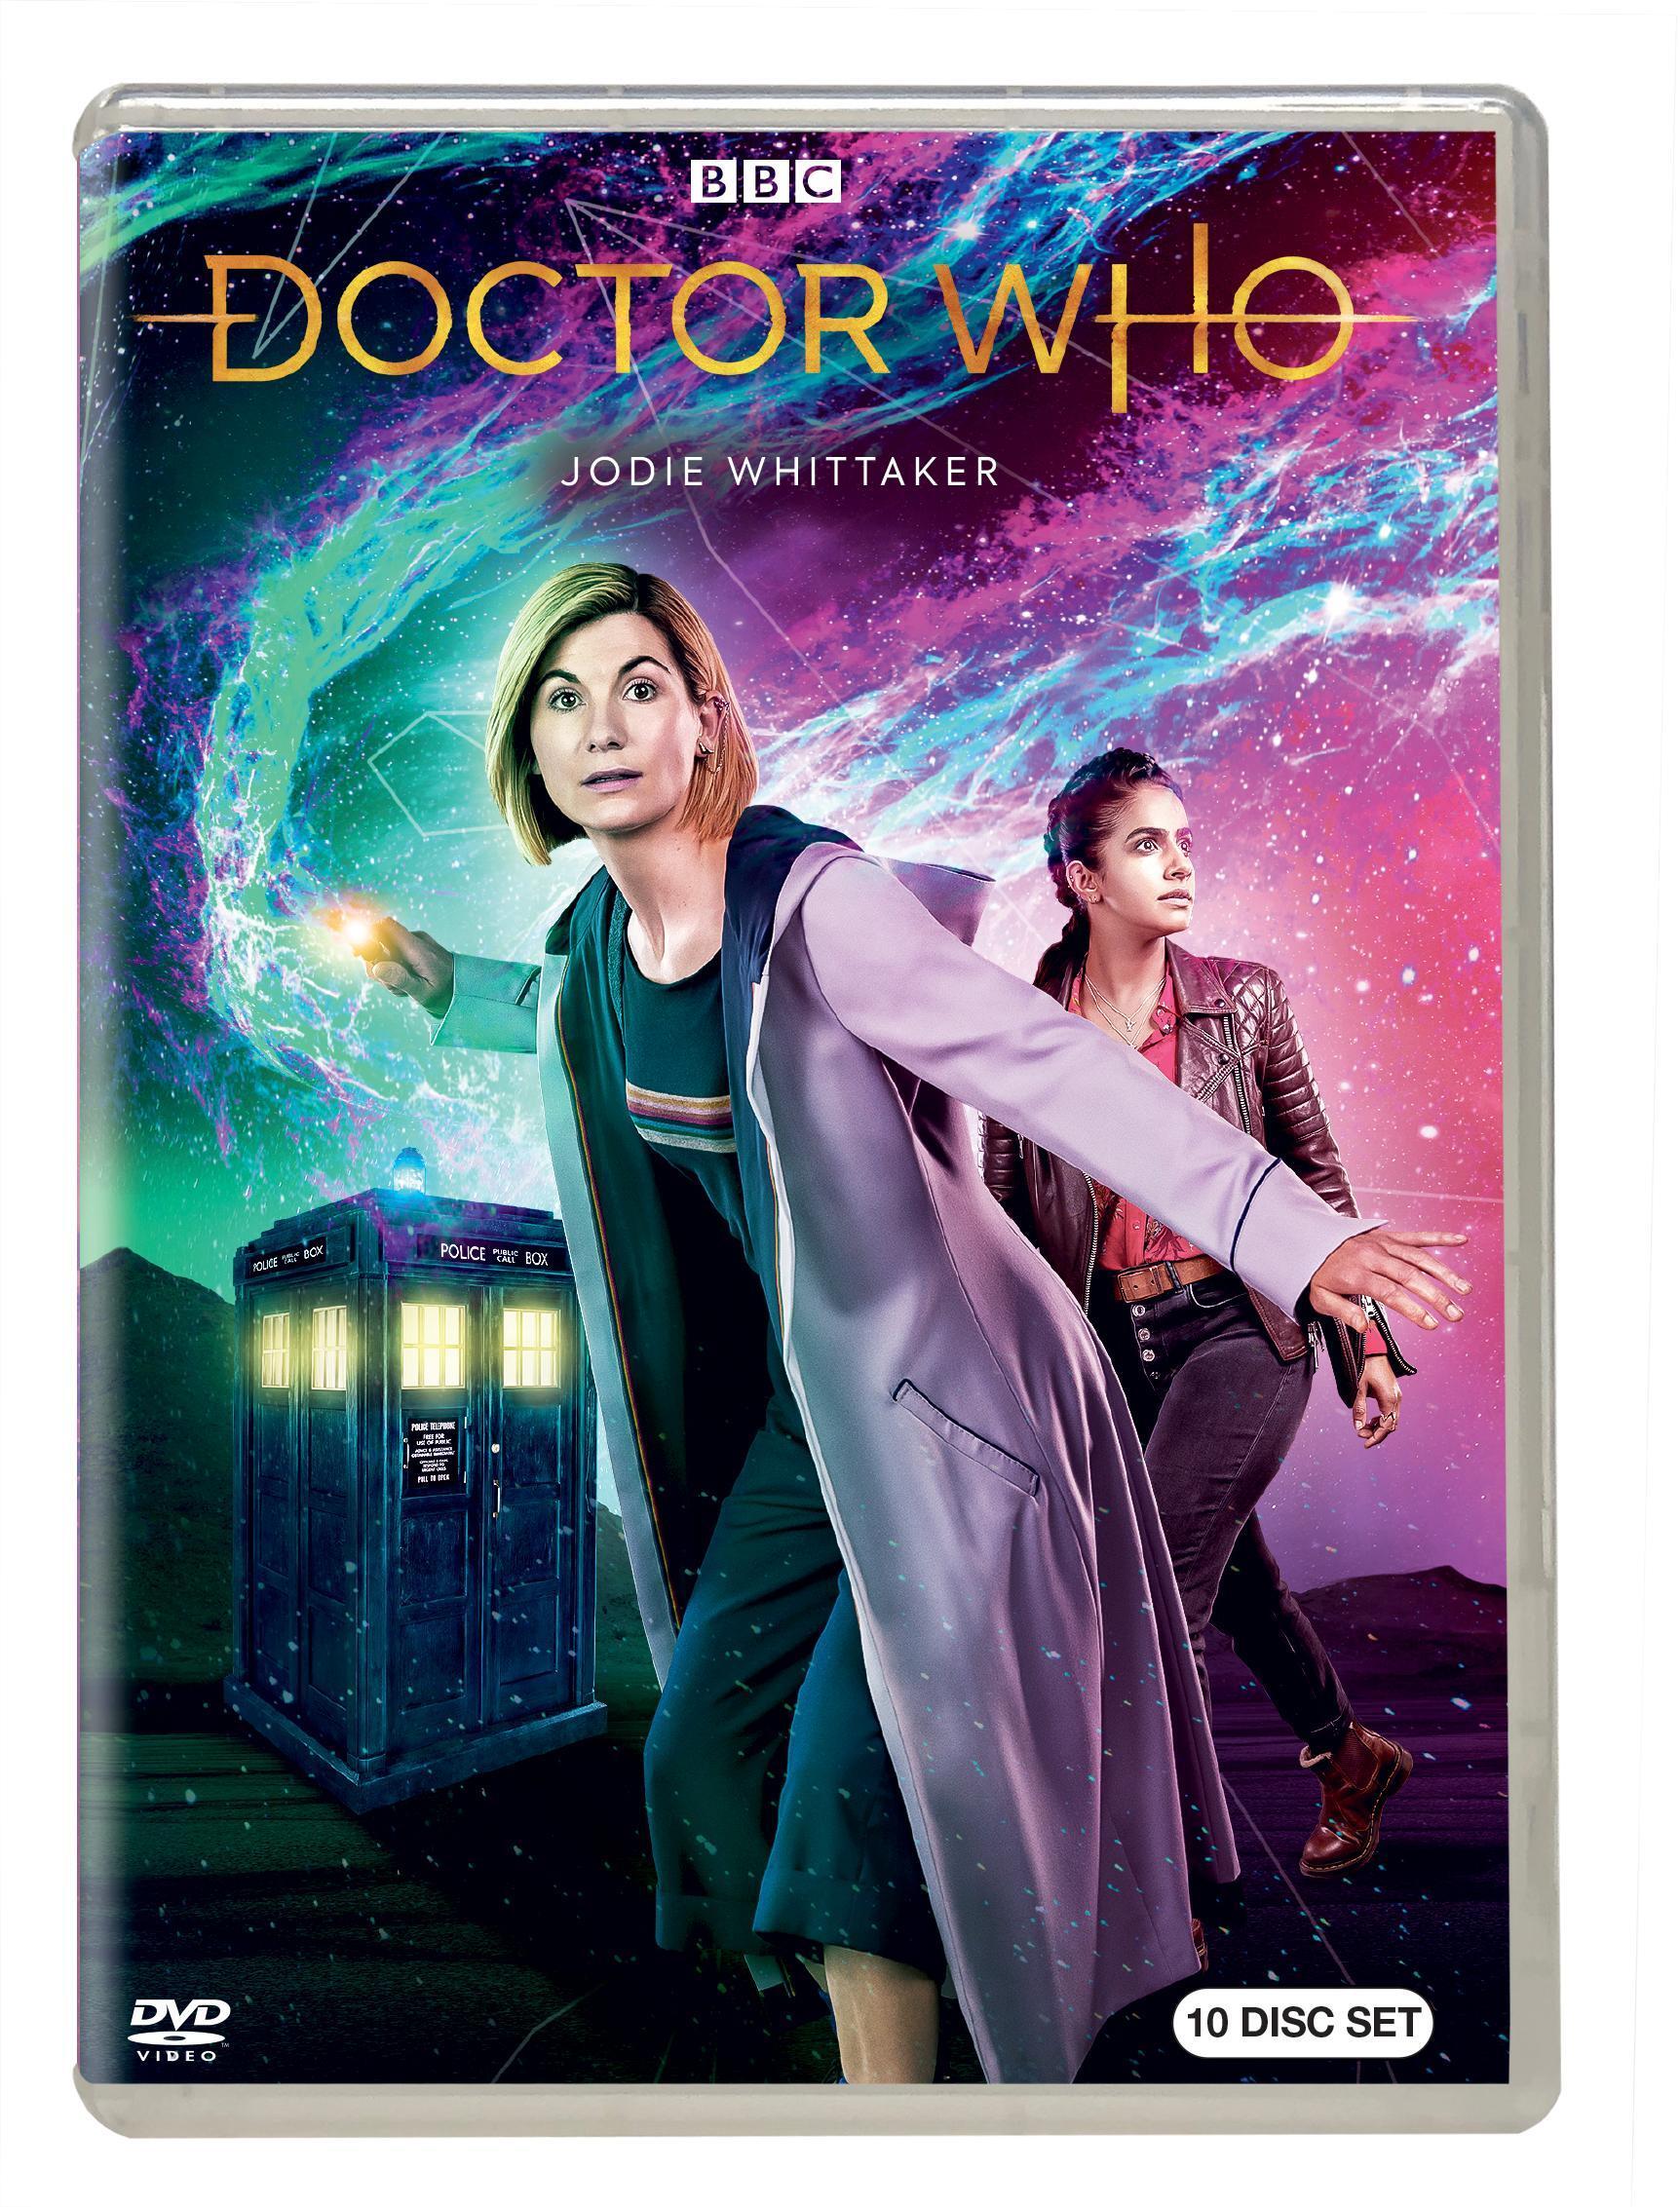 Doctor Who: The Jodie Whittaker Collection (Box Set) - DVD   - Sci Fi Television On DVD - TV Shows On GRUV